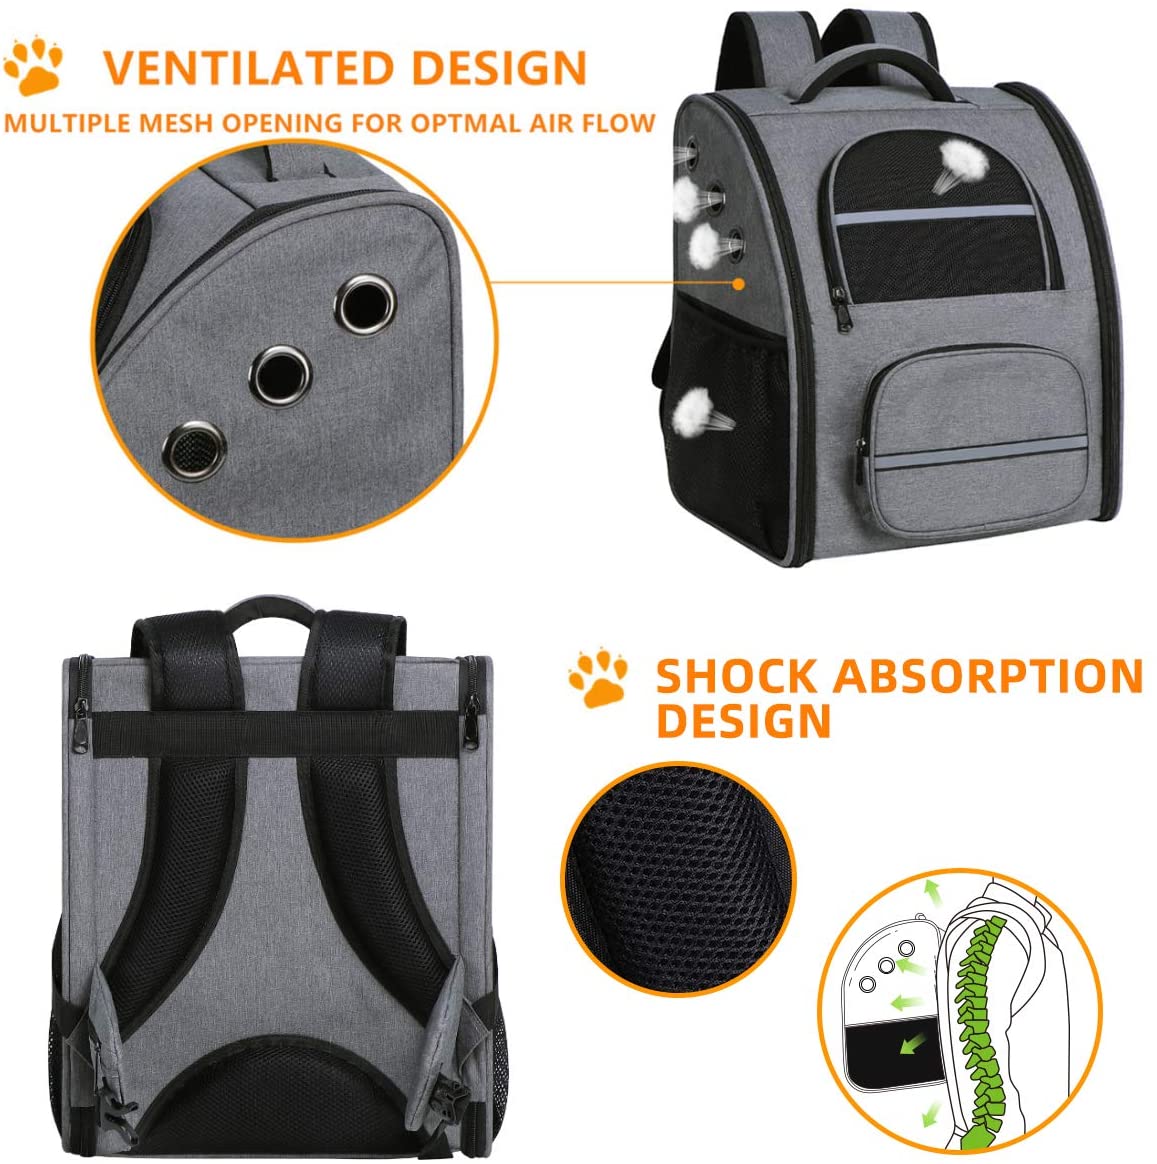 Trapezoid pet backpack